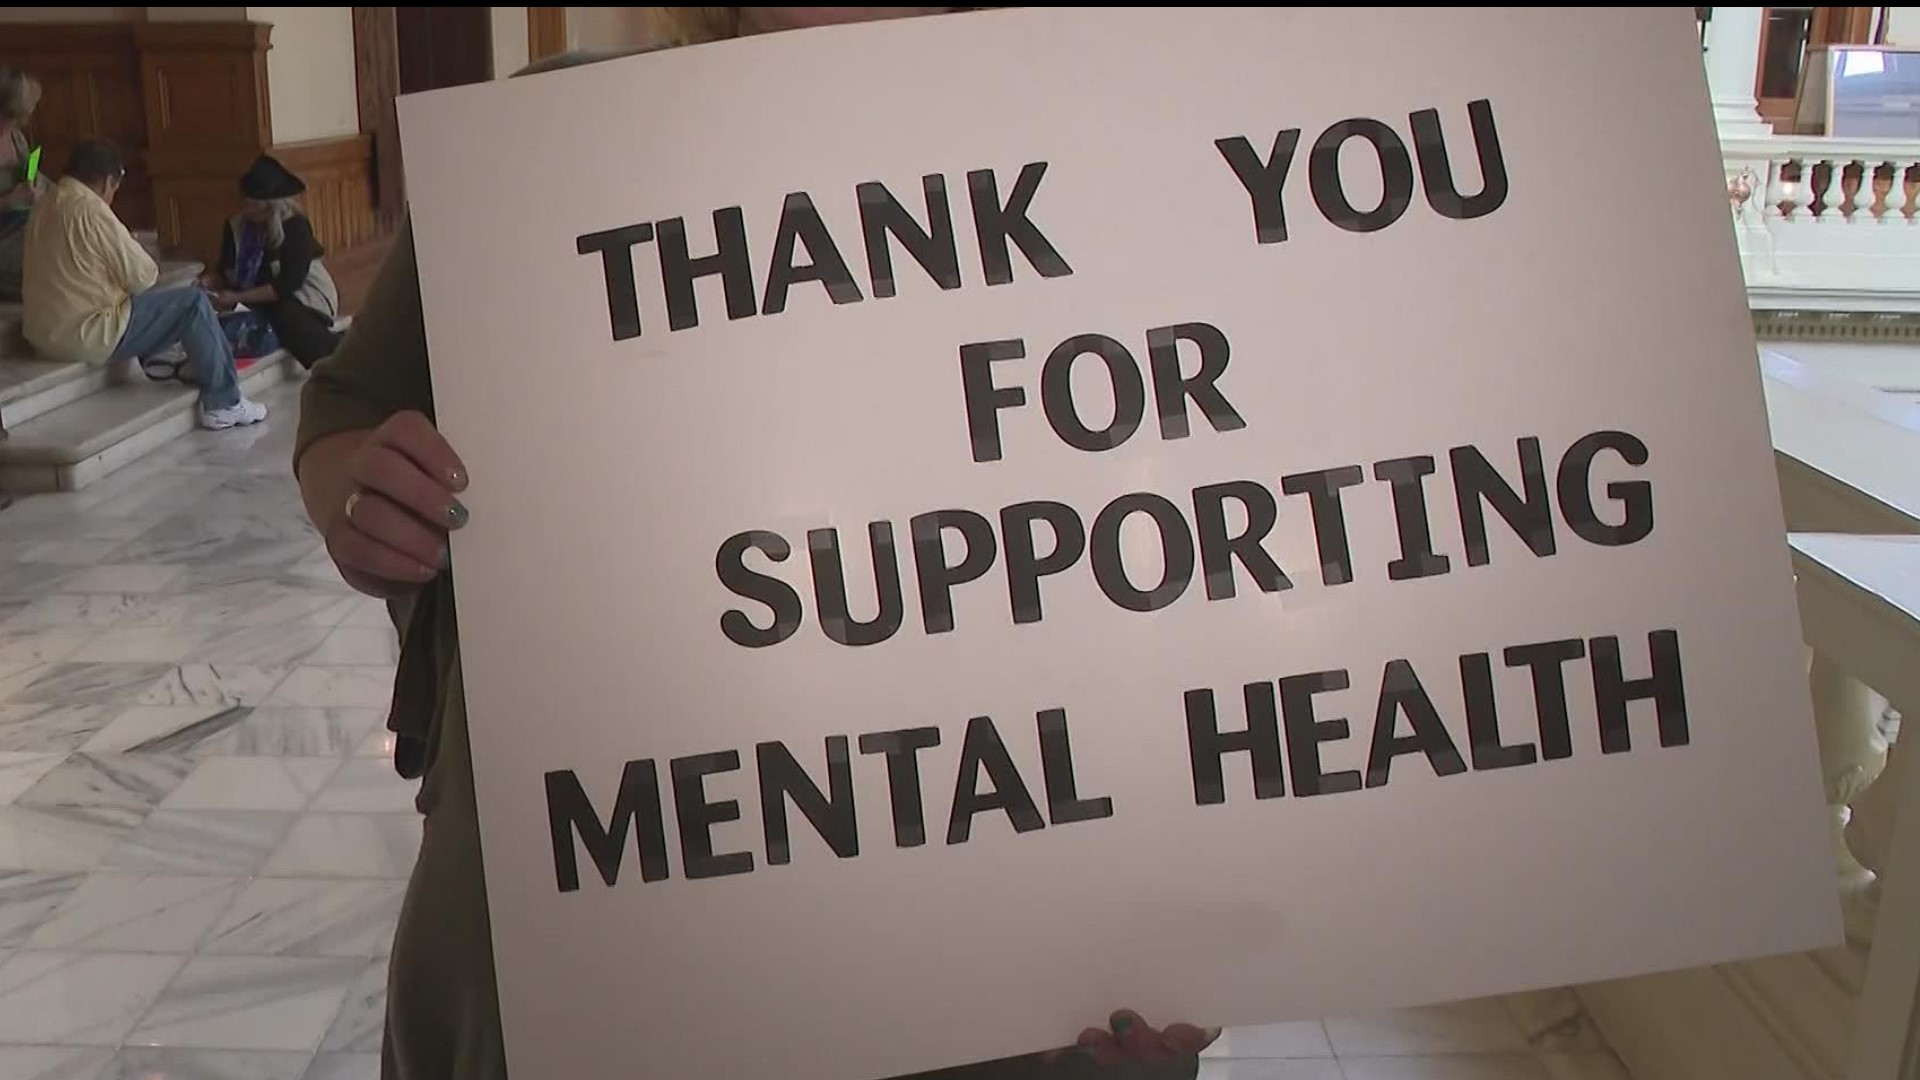 Police departments will also partner with mental health professionals.